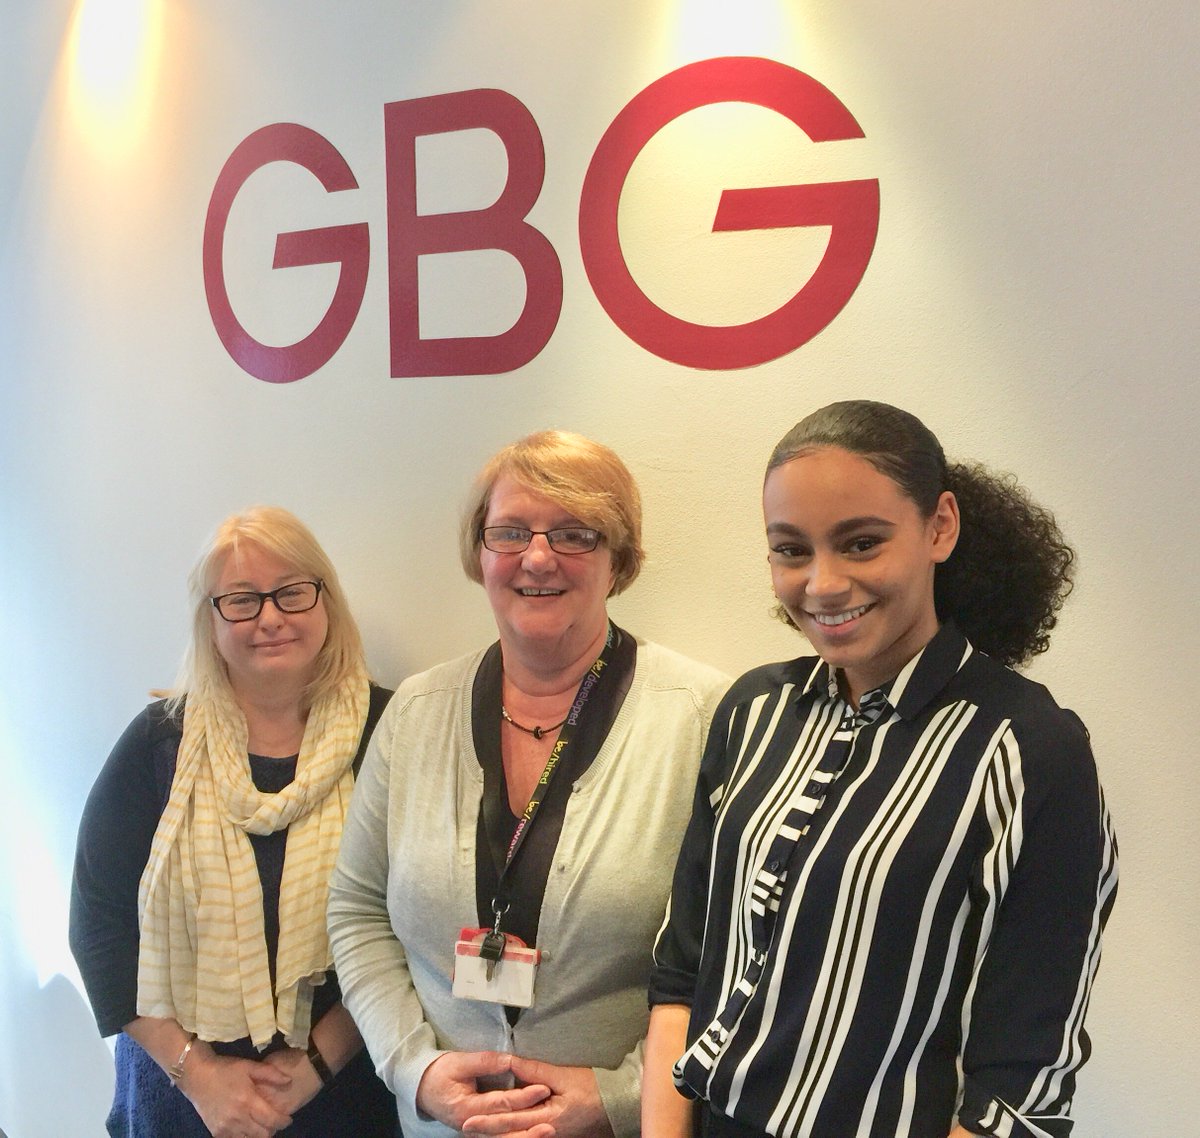 Sophie-Day1 of her #FMApprenticeship with #GBG. Sophie:“I’m looking forward to my new role. I thought, I could do that and went for it!“ Marina said“We saw that Sophie had useful transferable skills from her previous experience. We’re excited to develop Sophie’s skills.” #NAW2018